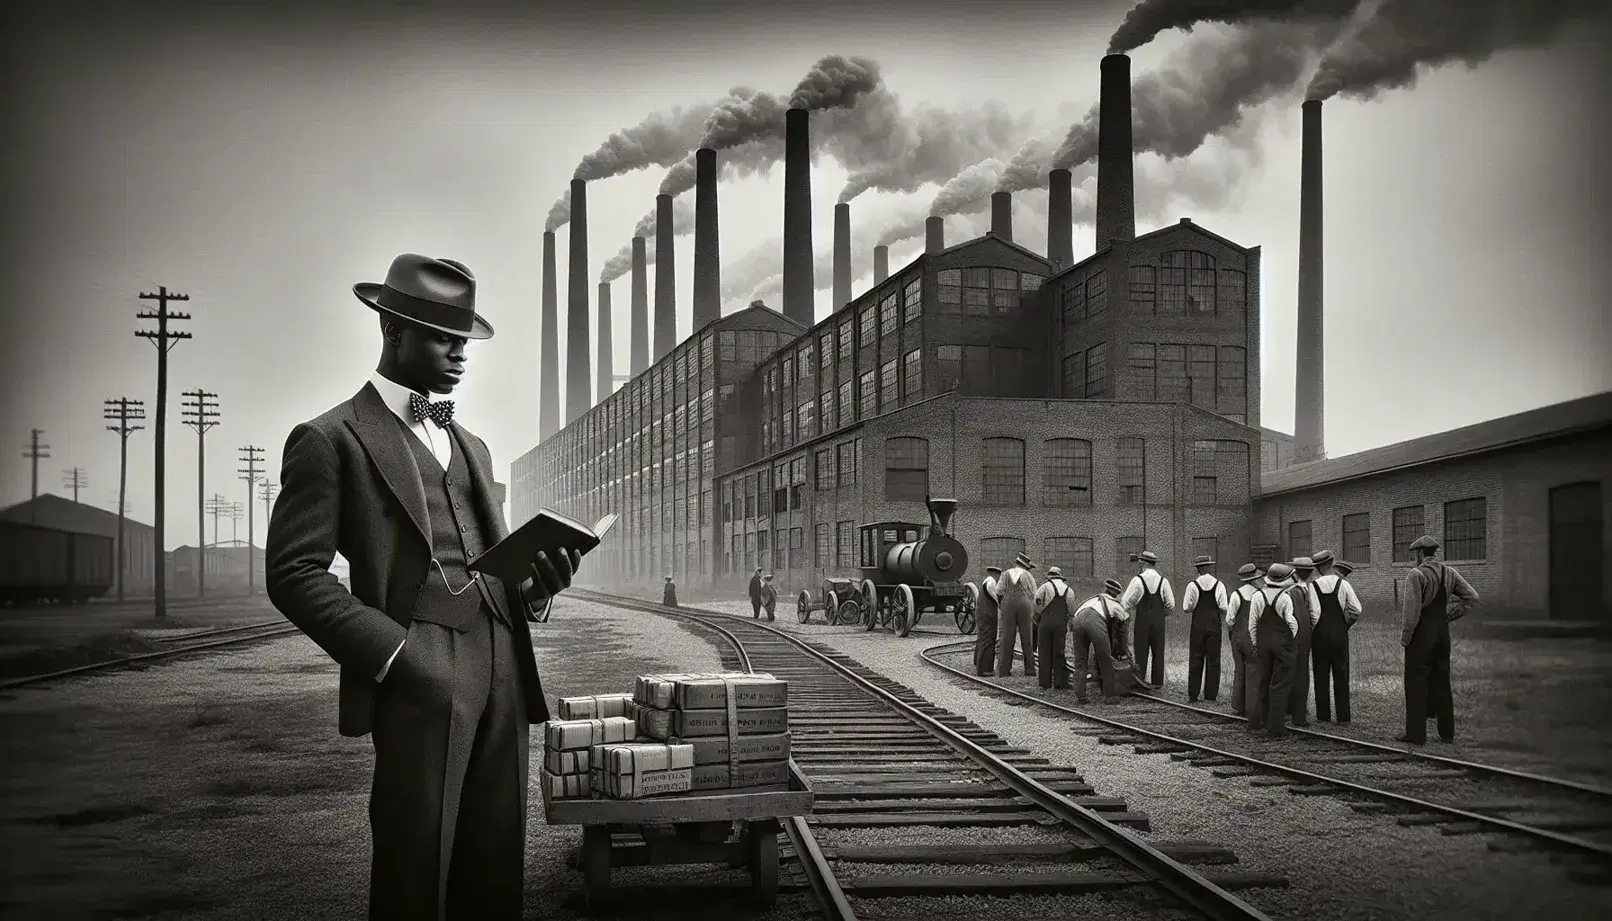 Early 20th-century black and white photo of a well-dressed black man with a book outside an industrial brick building, workers and meat-filled carts in the background.